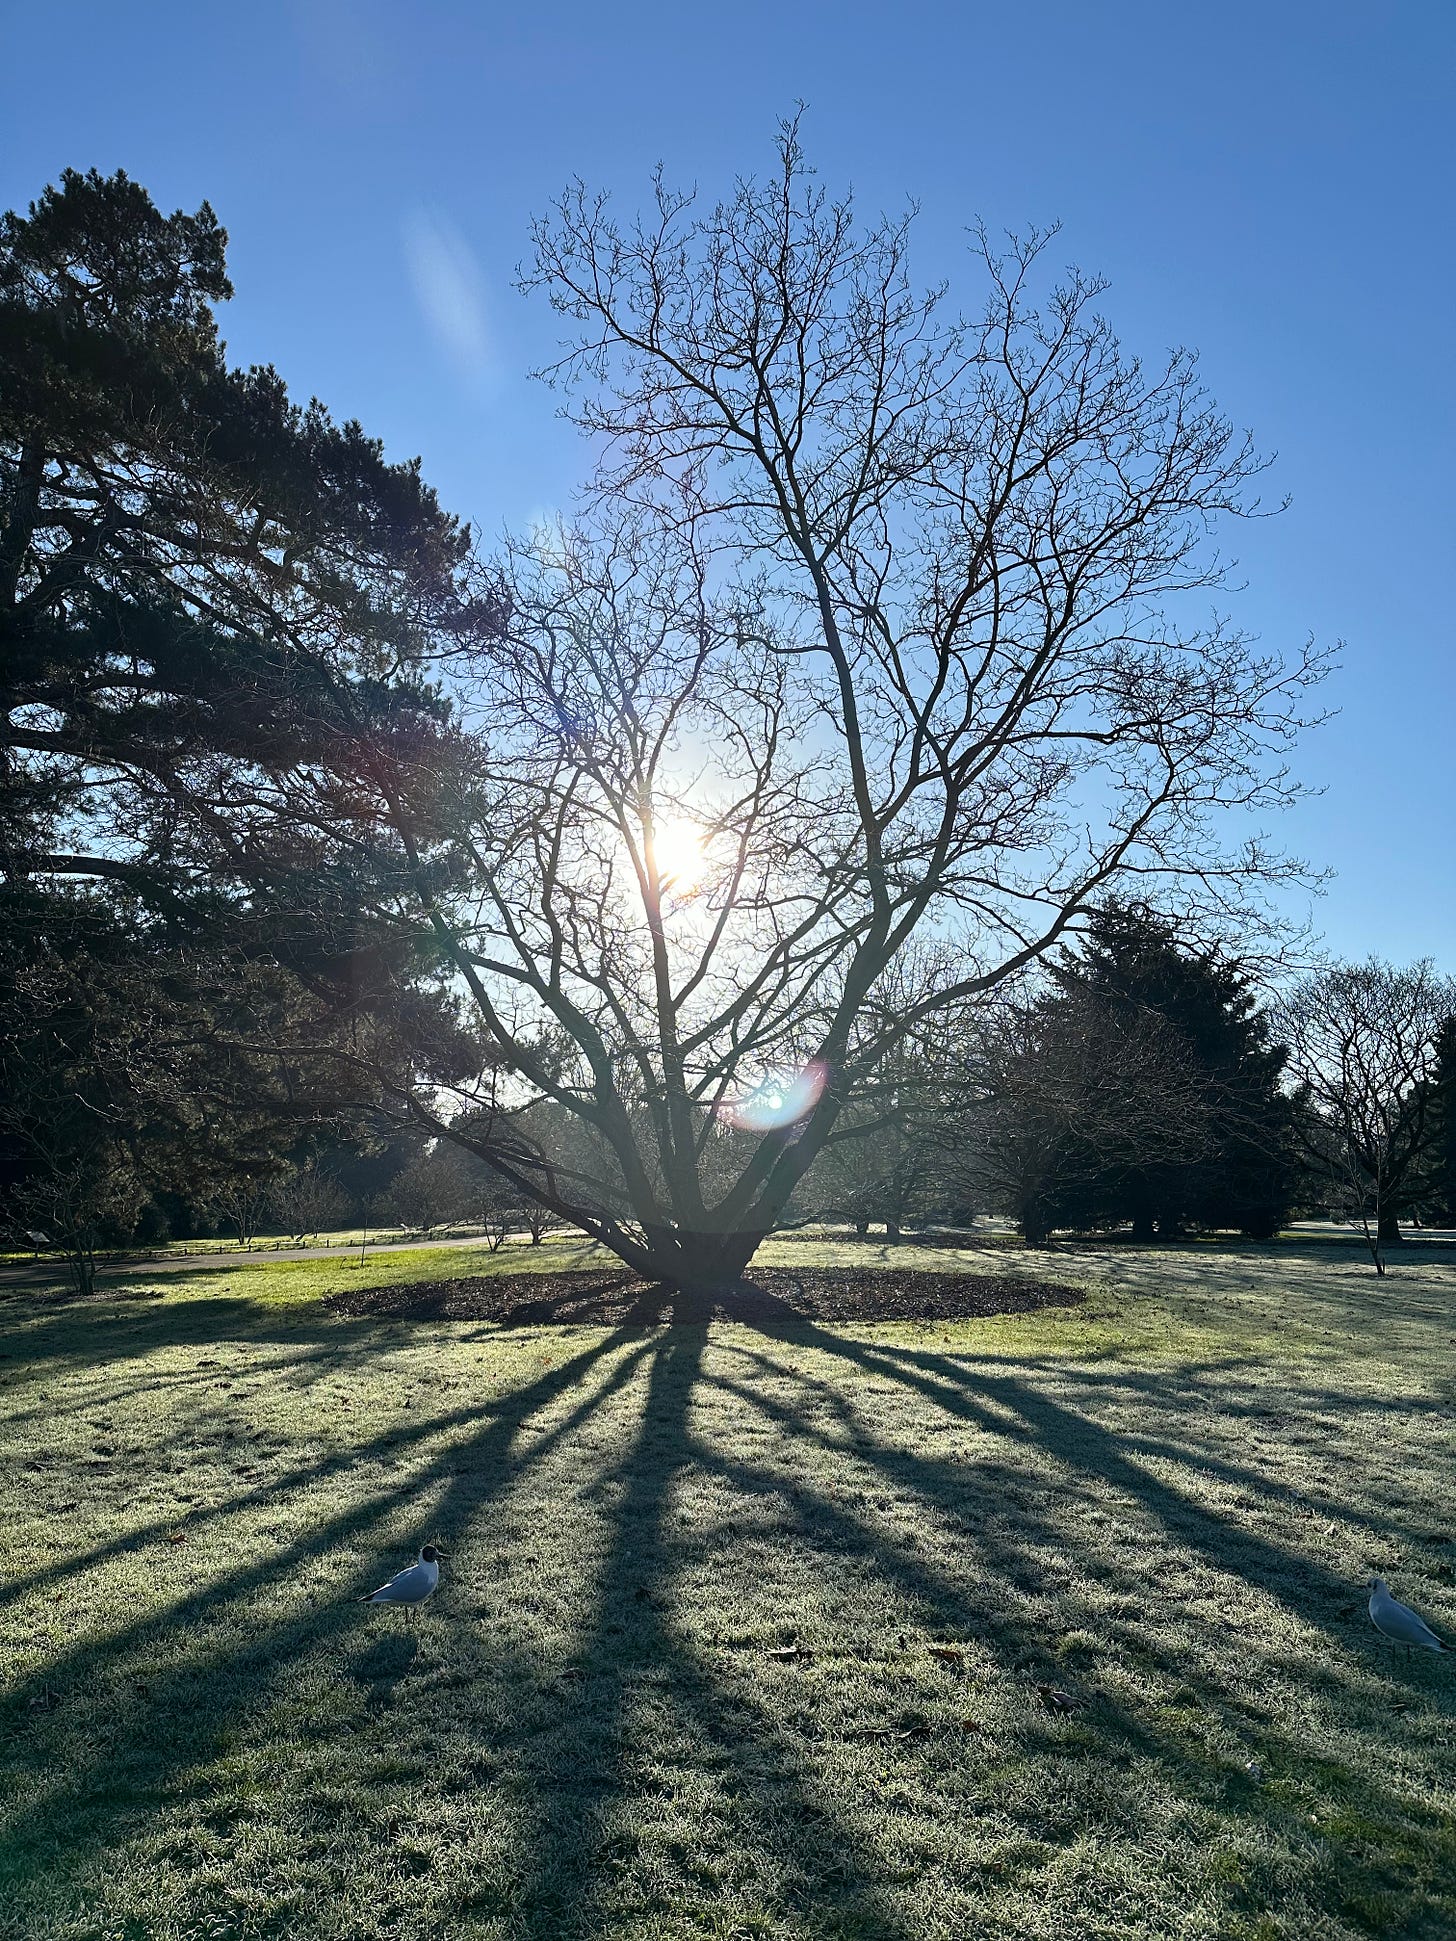 Tree with bare branches and it silhouette on frosty grass, against bright blue skies